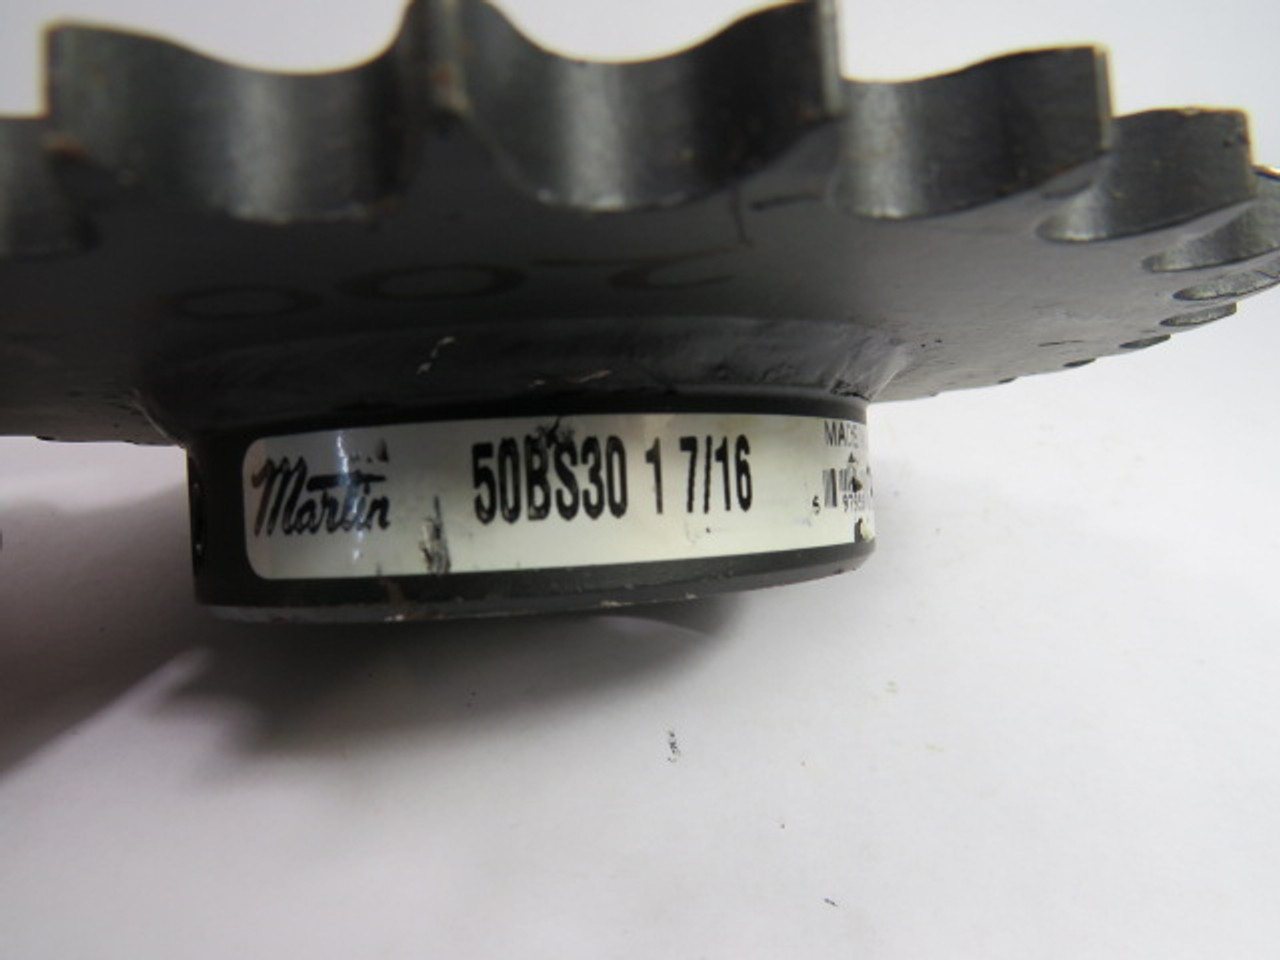 Martin 50BS30-1-7/16 Roller Sprocket 1-7/16" Bore USED